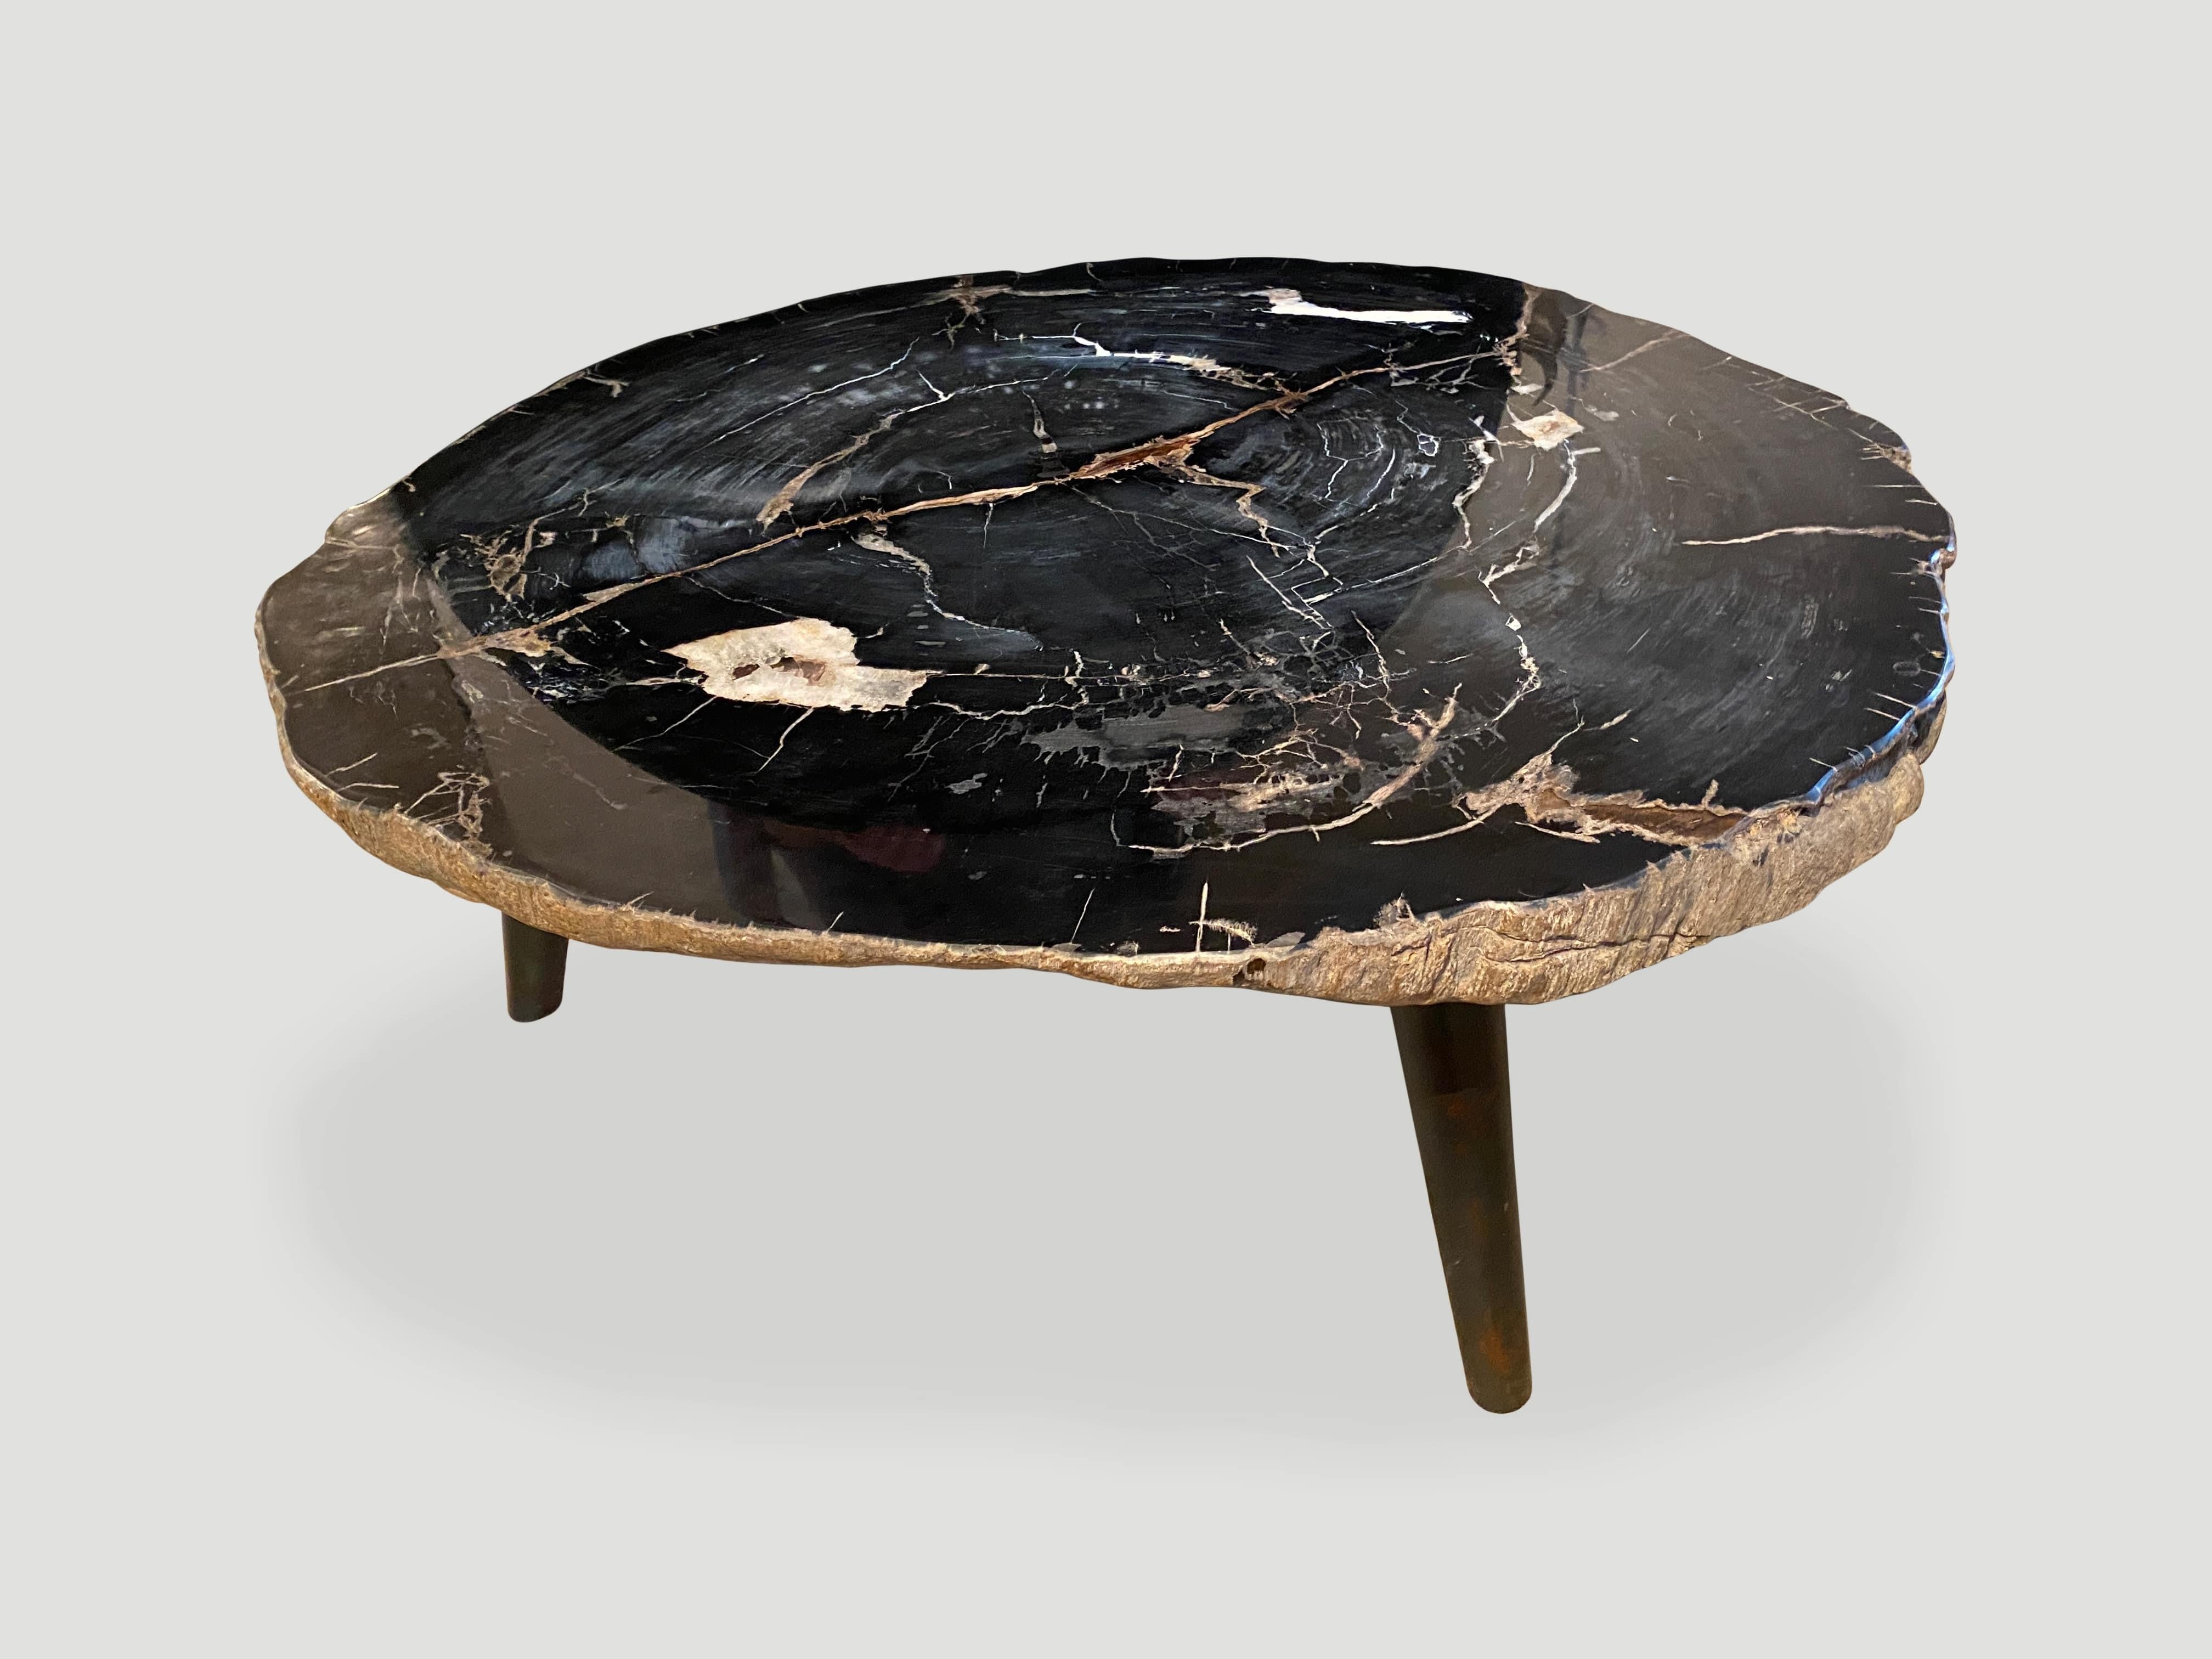 Stunning rare blue black tones on this petrified wood three inch slab coffee table. This large impressive slab is resting on a mid century style burnt metal base. Contrasting white markings and natural crystals are embedded on the top. We polished